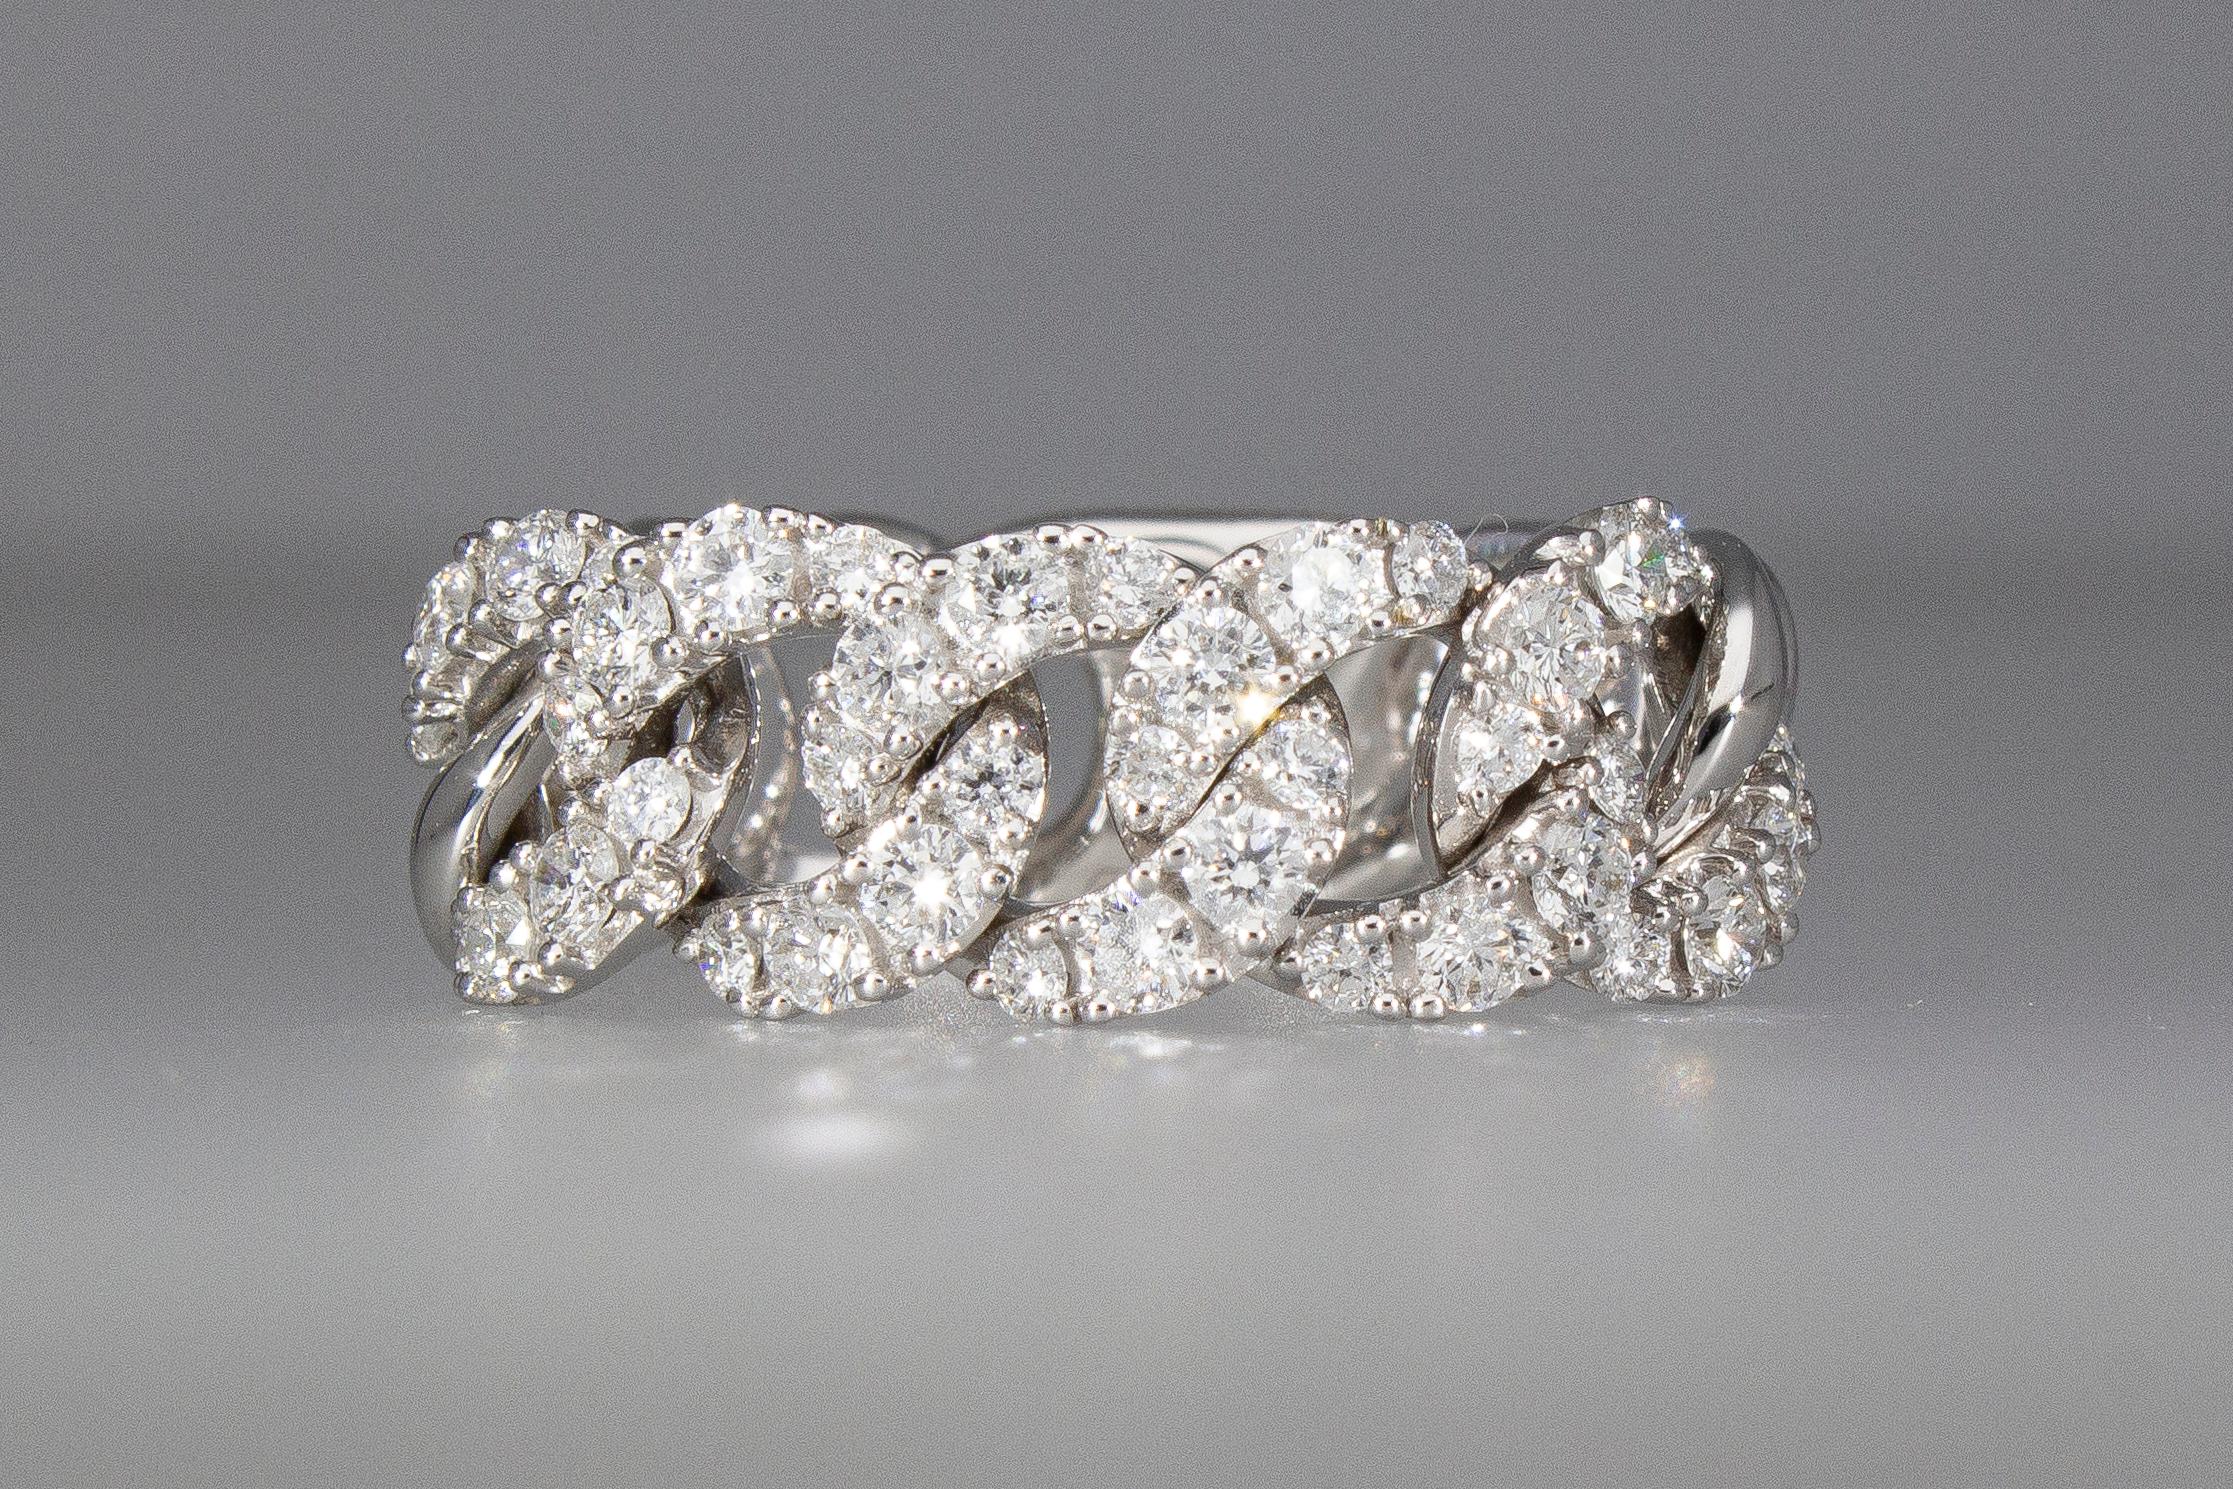 Groumette model ring with 40 brilliant cut diamonds set on 5 links, for a total weight of ct 0.90.
The ring has soft links 5 with diamonds and 6 without diamonds, plus 1 link to allow for a possible change of size.
The ring is in 18 Kt white